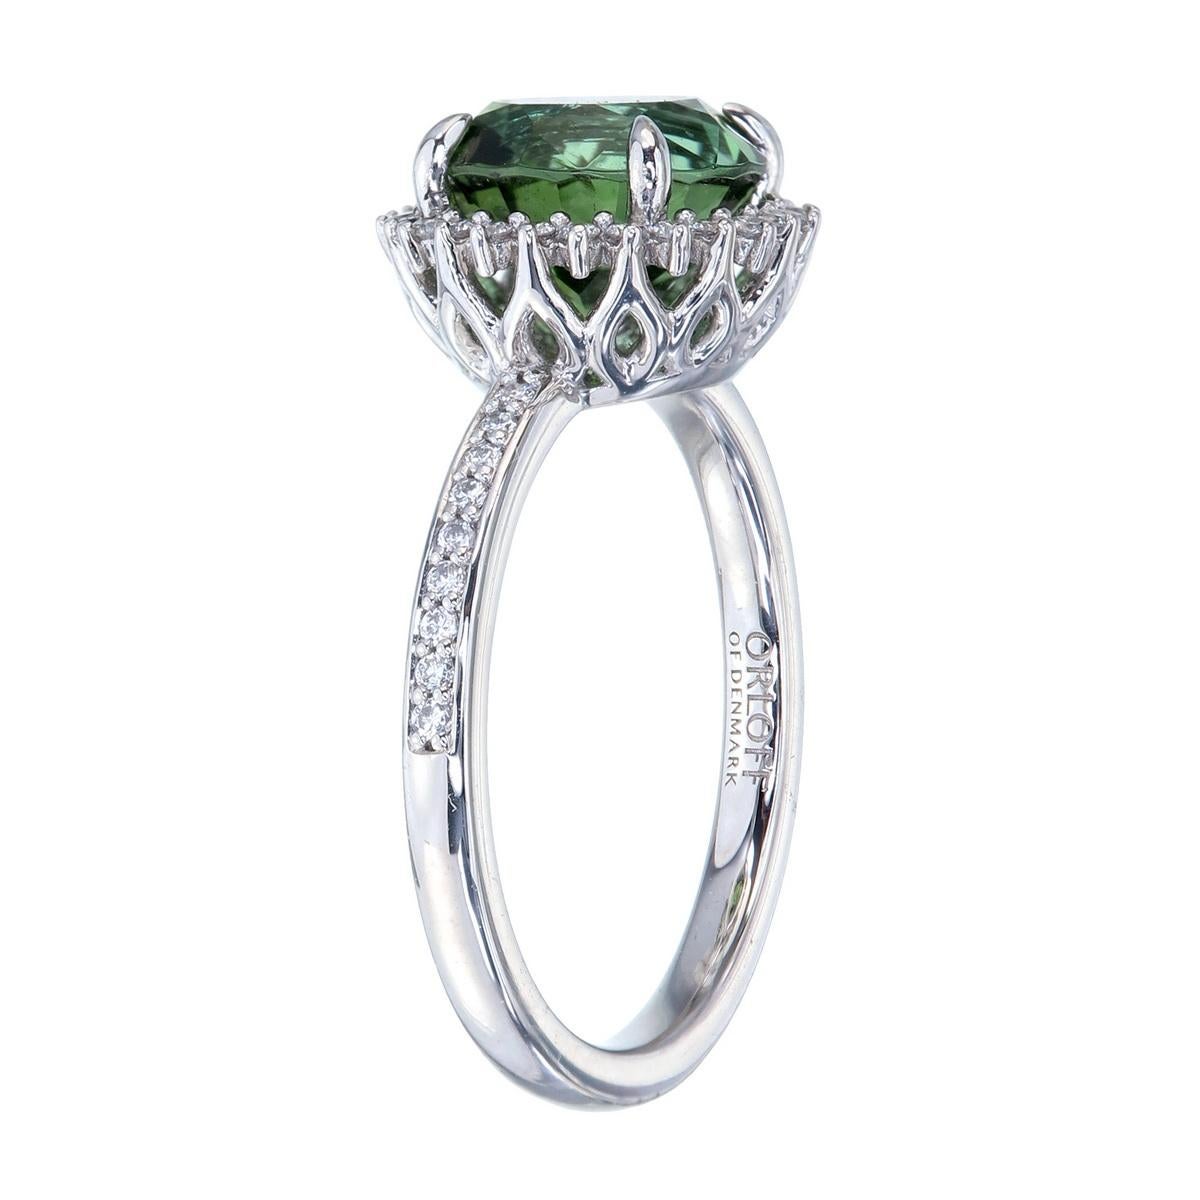 Contemporary Orloff of Denmark, GIA - 2.60 ct Olive Green Tourmaline Ring set in 950 Platinum For Sale